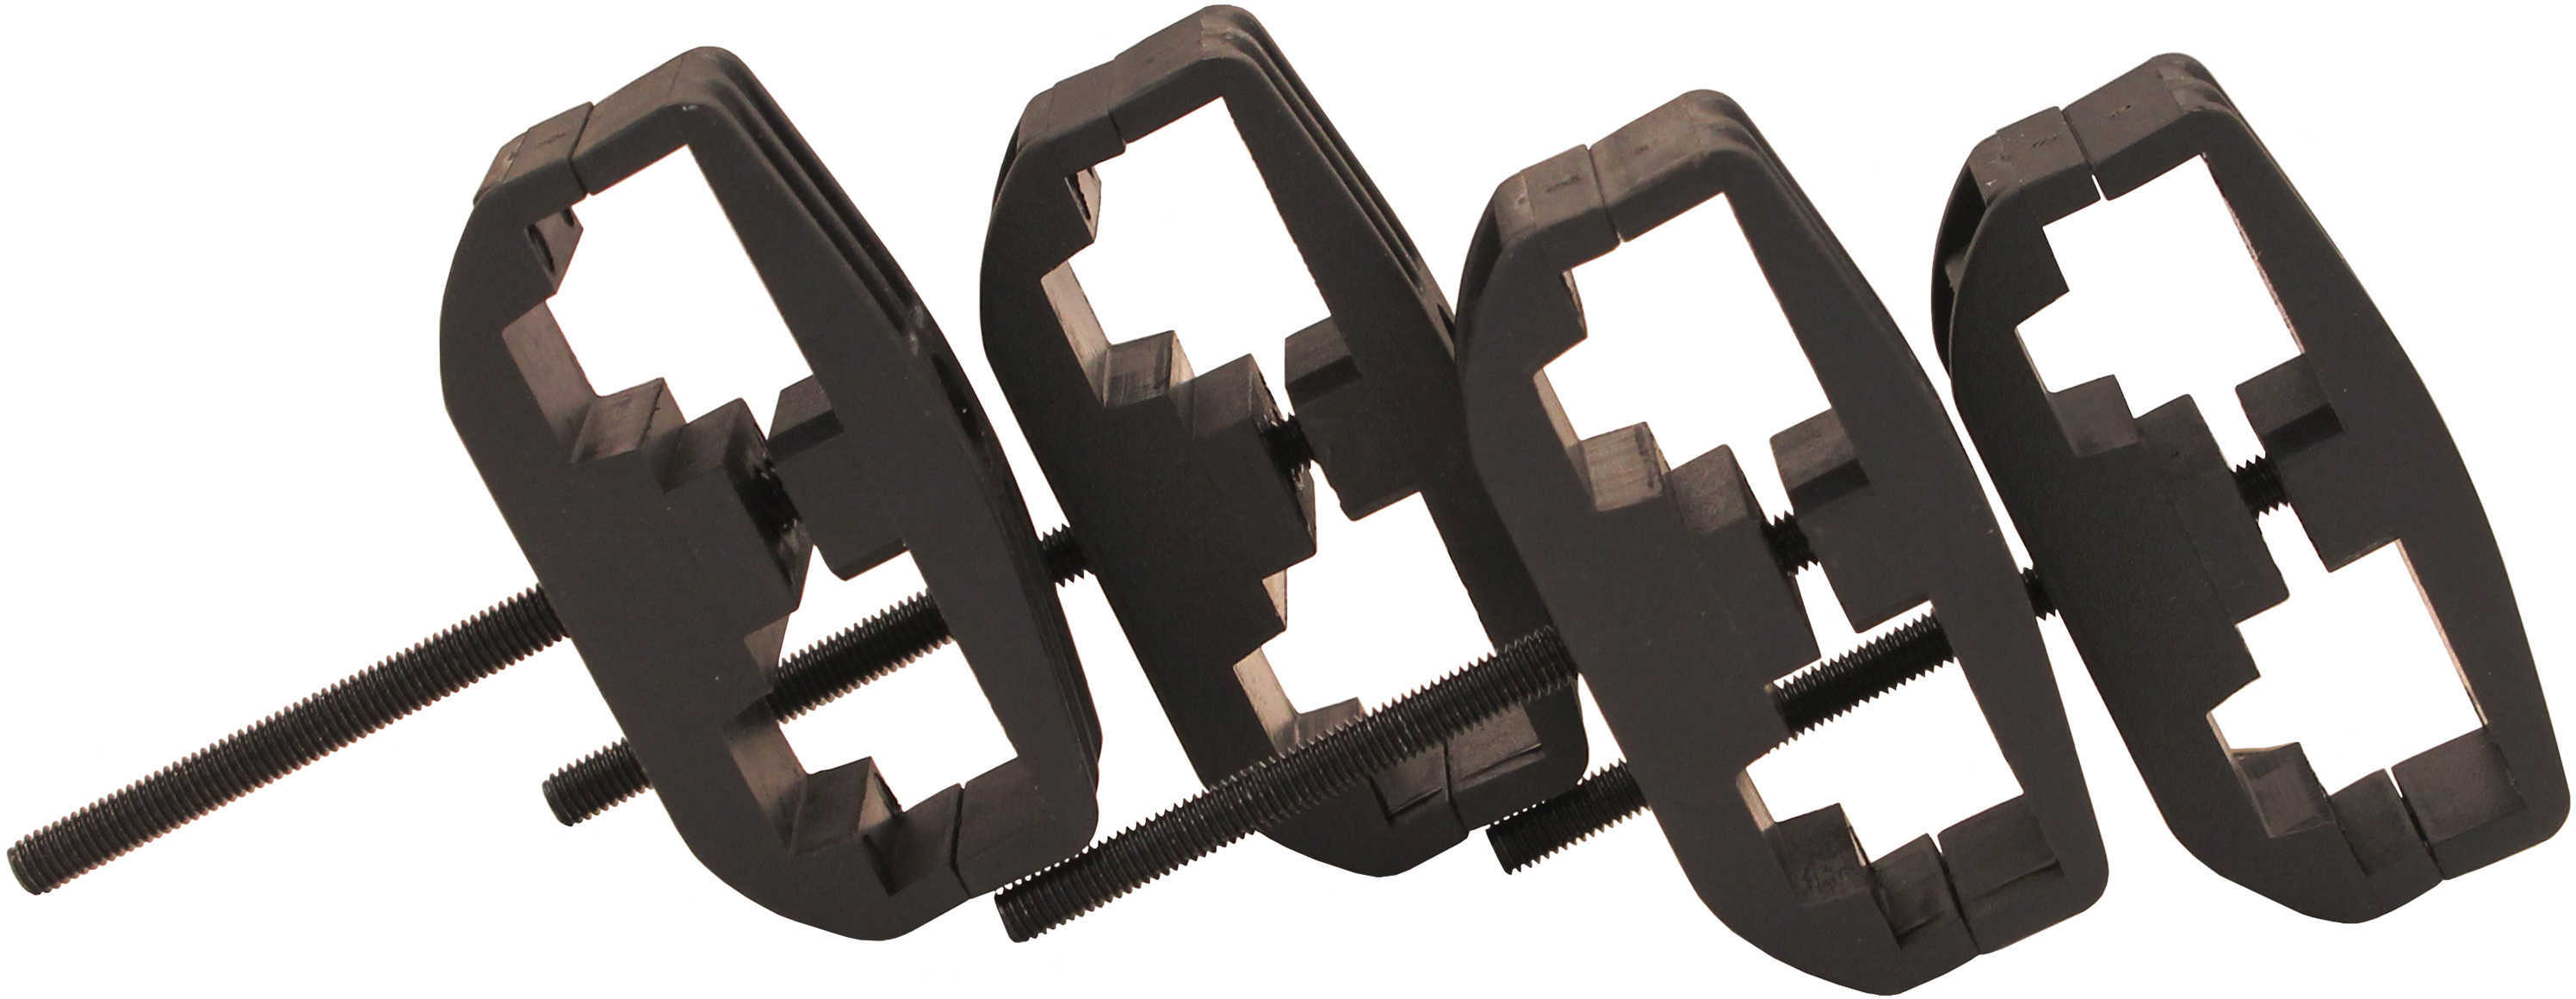 Promag AR15 & Mini-14 Mag CLAMPS 4Pk Blk Poly